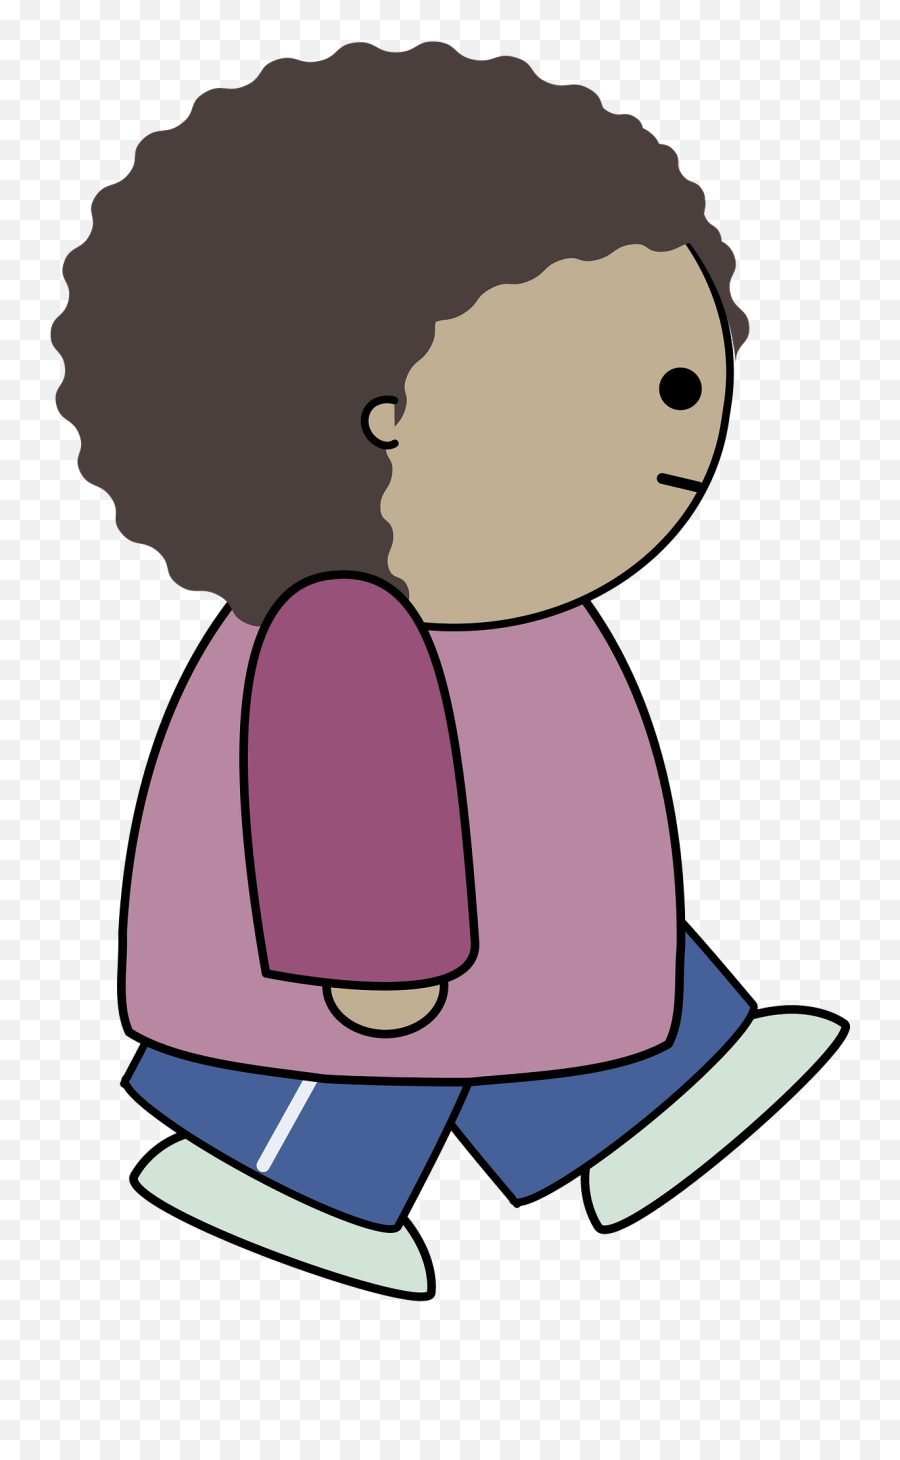 Curly Haired Girl In A Pink Shirt Walking Clipart Free Emoji,Curly Hair Clipart